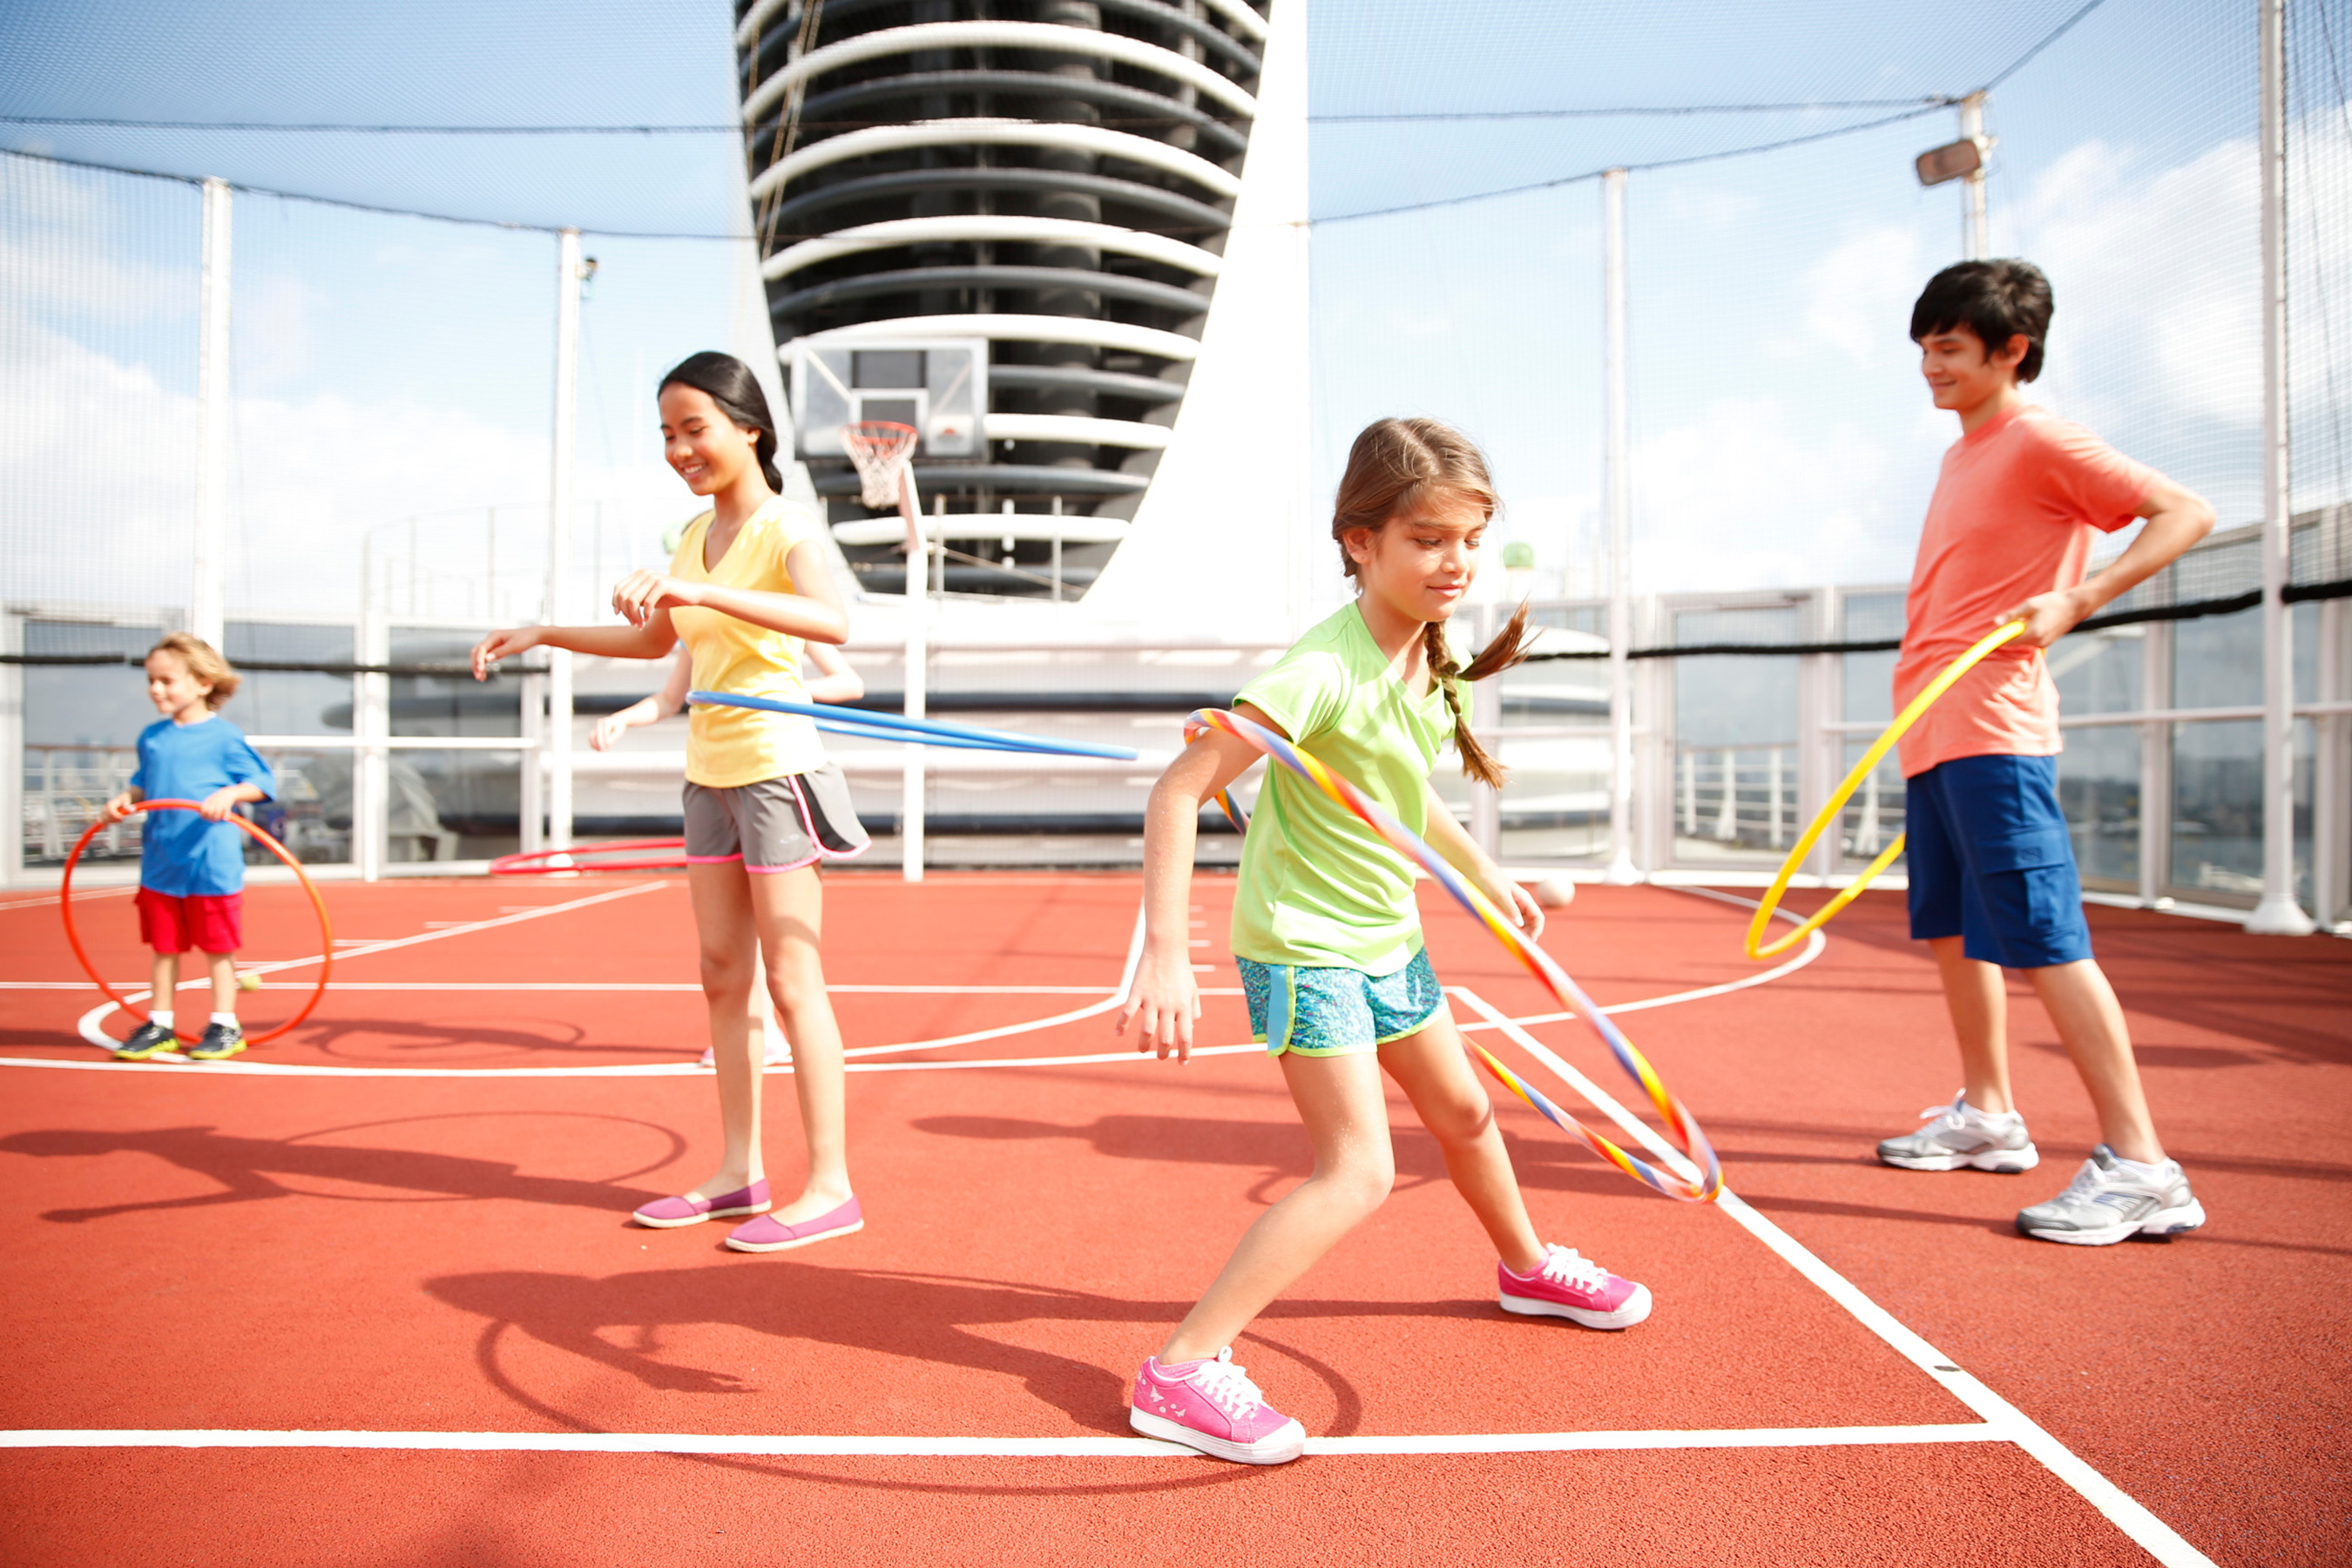 Kids have fun with Hula Hoops on the sports deck of Holland America Line’s cruise ship.